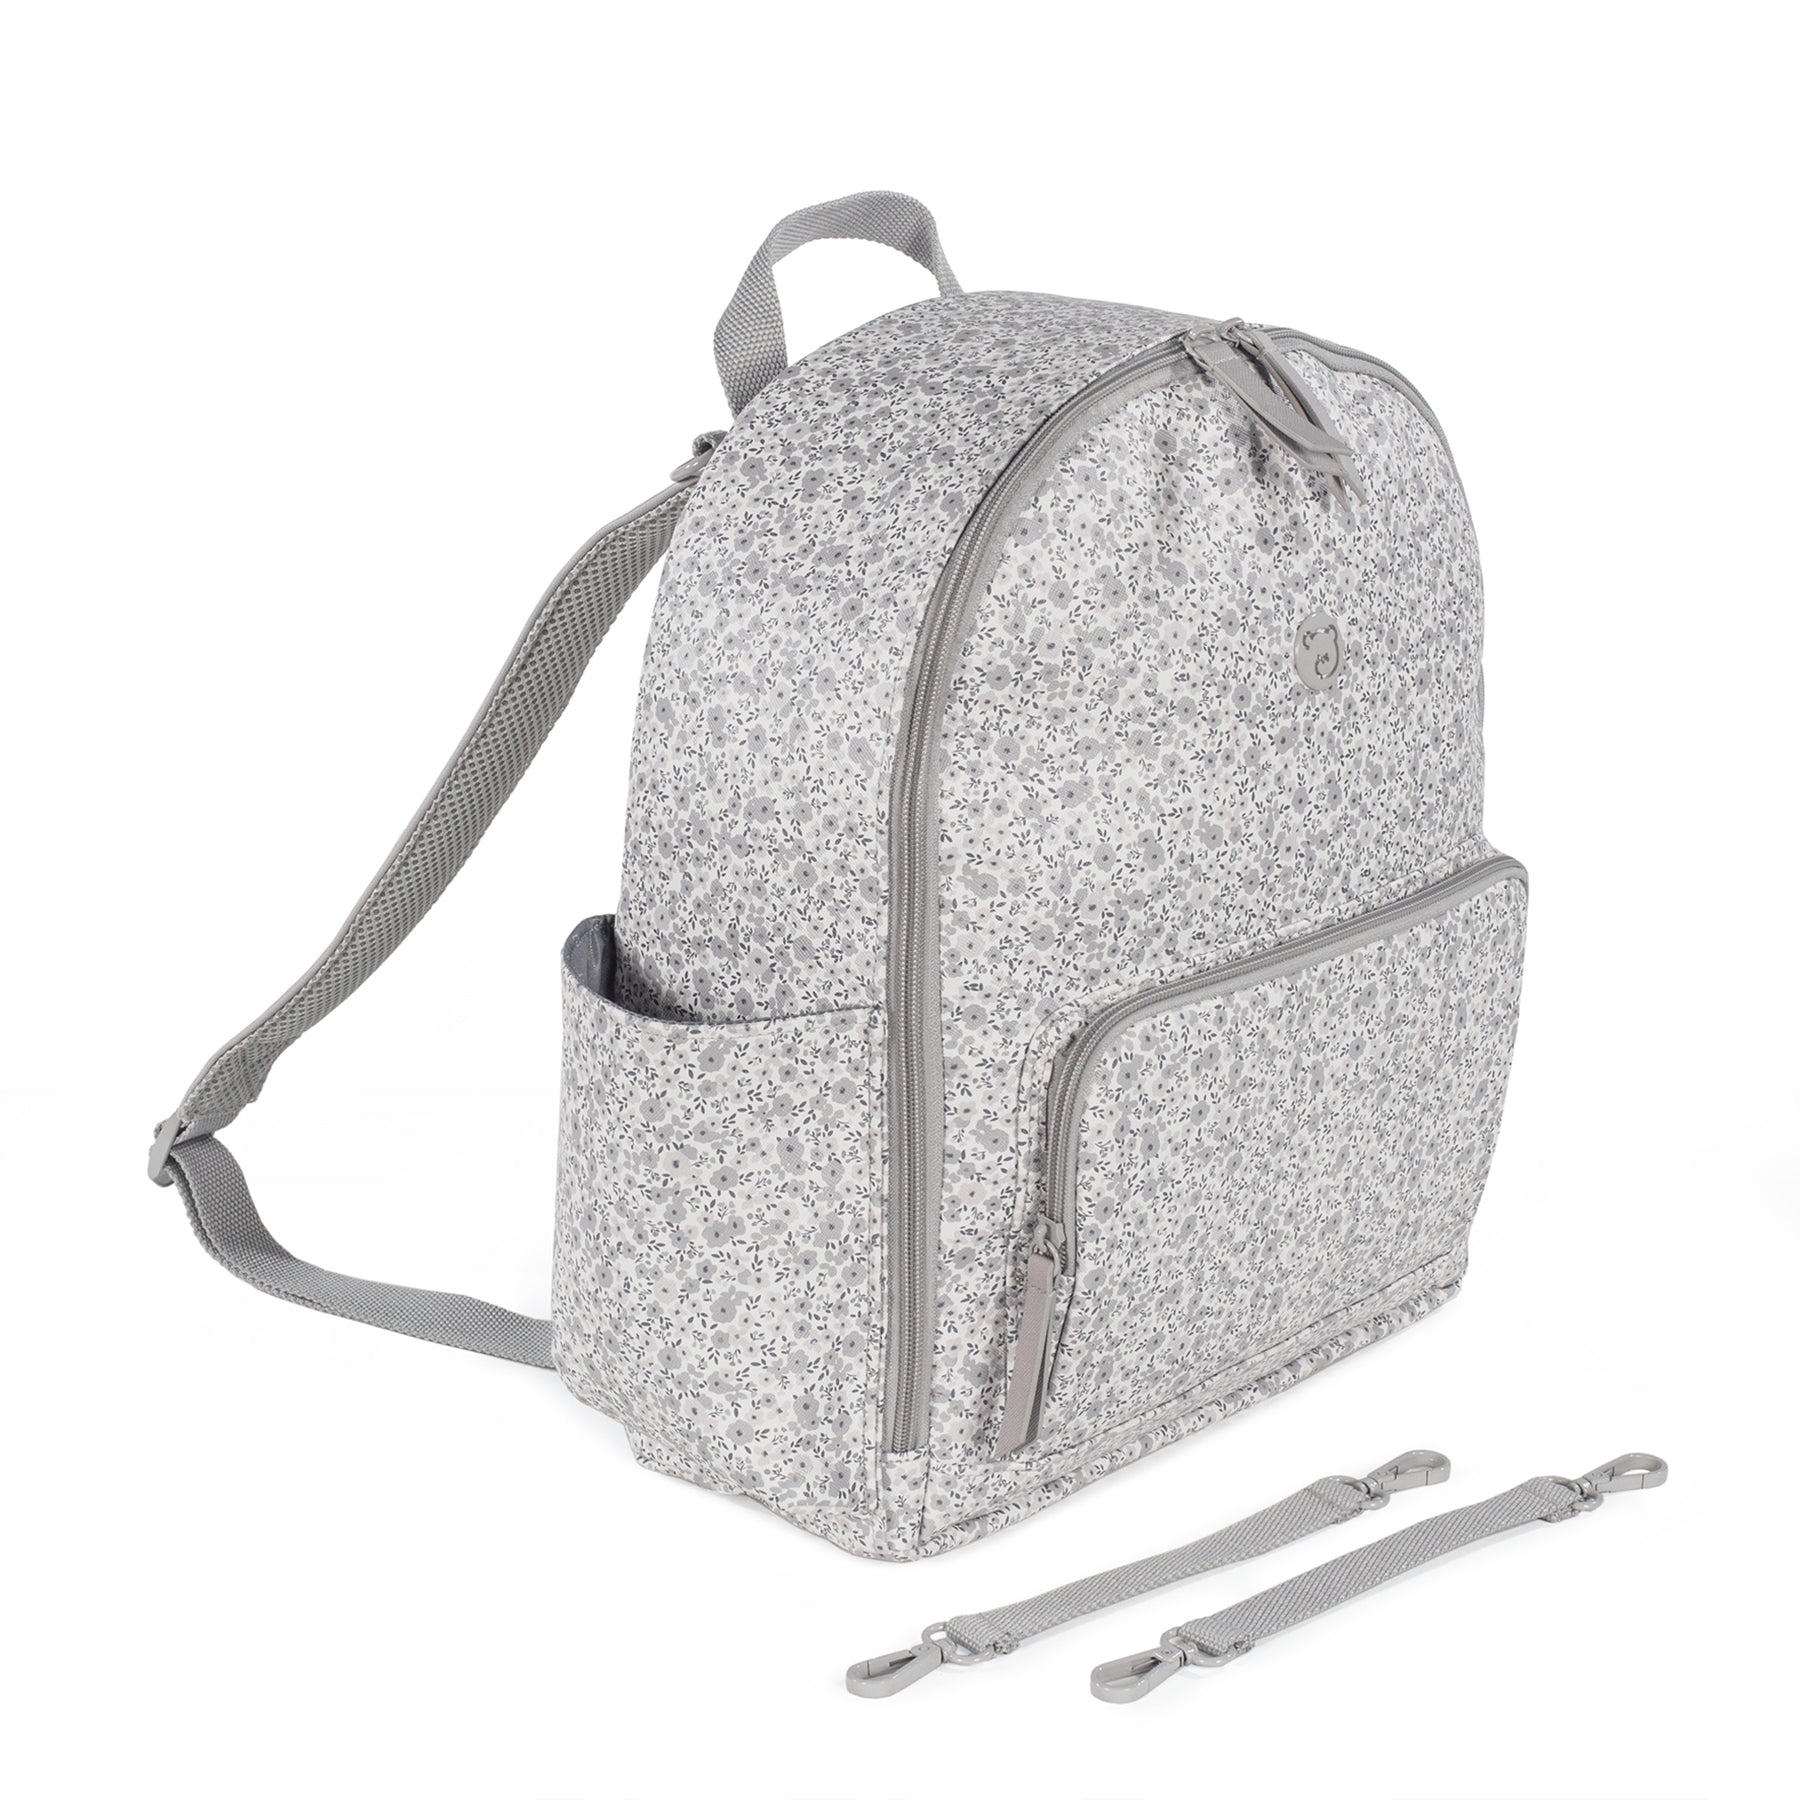 Pasito a Pasito Flower Mellow Grey Backpack Diaper Changing Bag